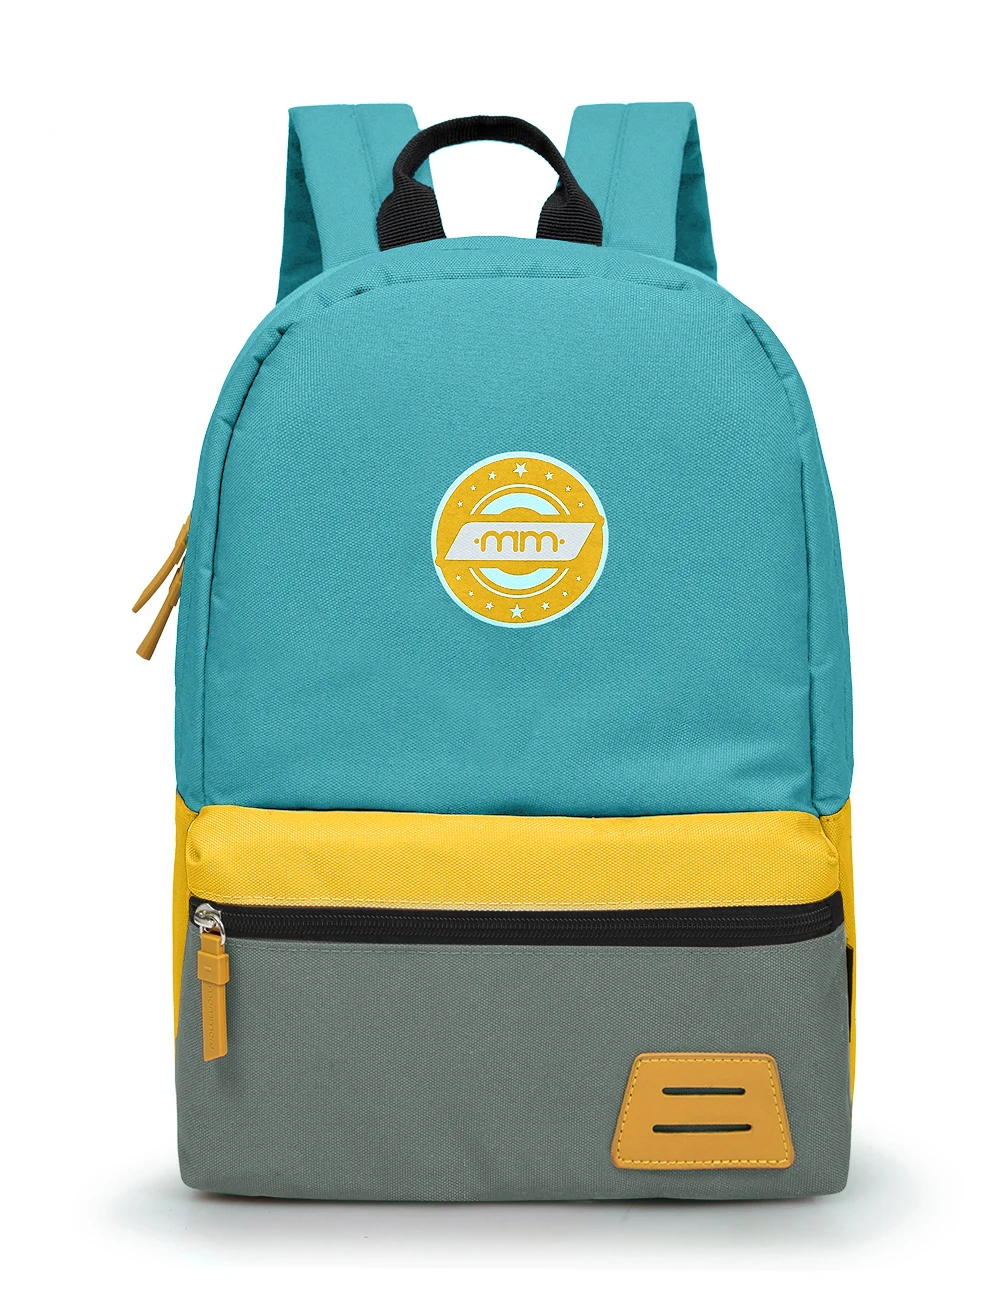 

RTS Fashion Promotional Kids Backpacks for Boys Girls Middle High Backpack School Bag Kids, Customized color